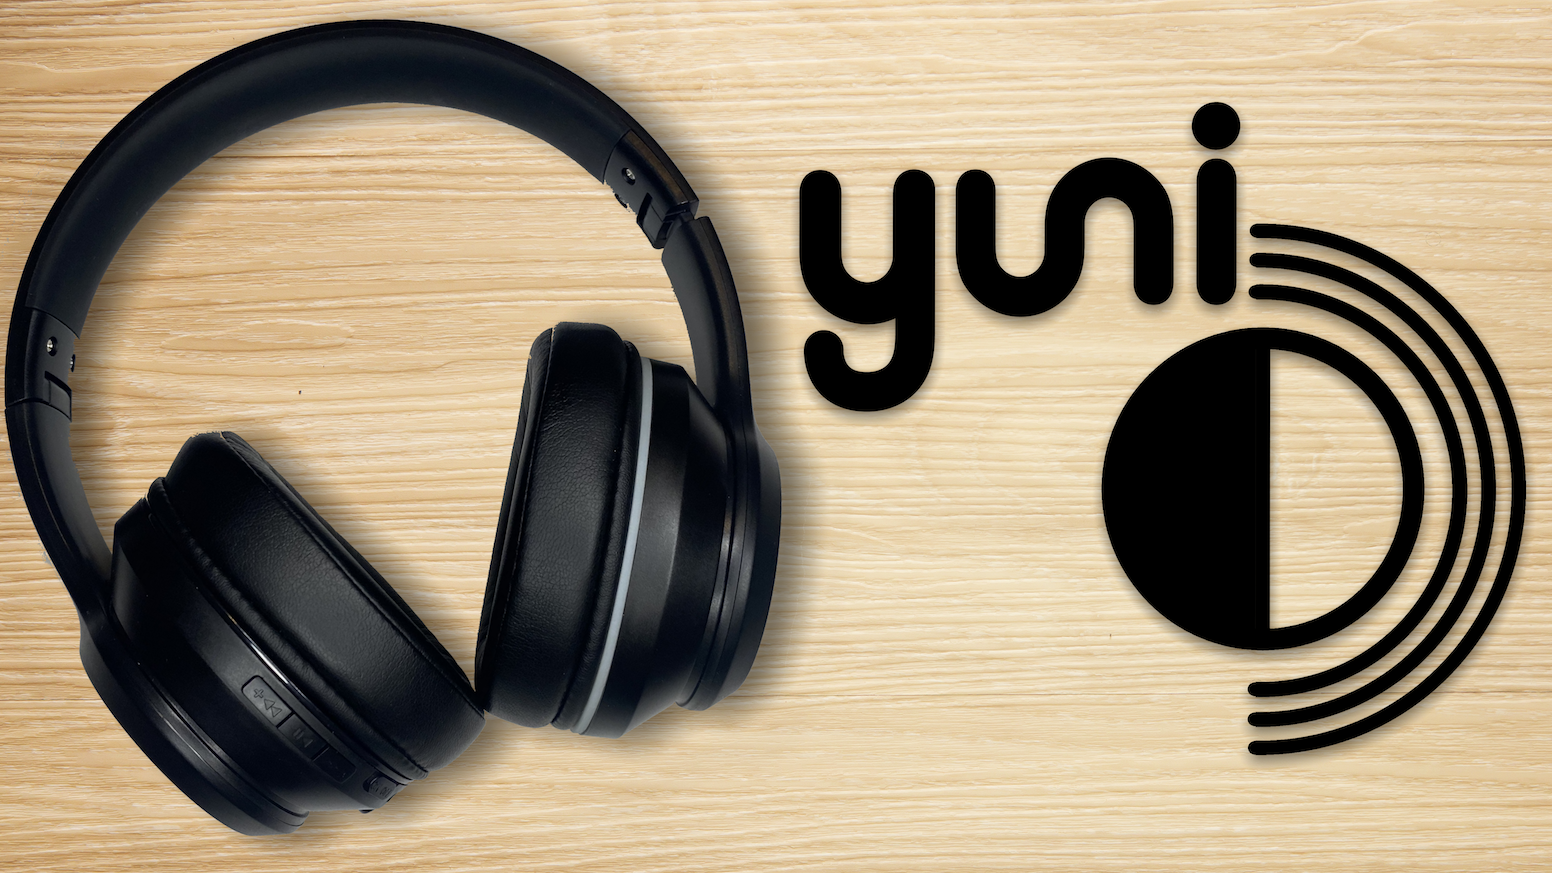 Yuni Technologies Launches Single-sided Stereo Headphone For People With Unilateral Hearing Loss